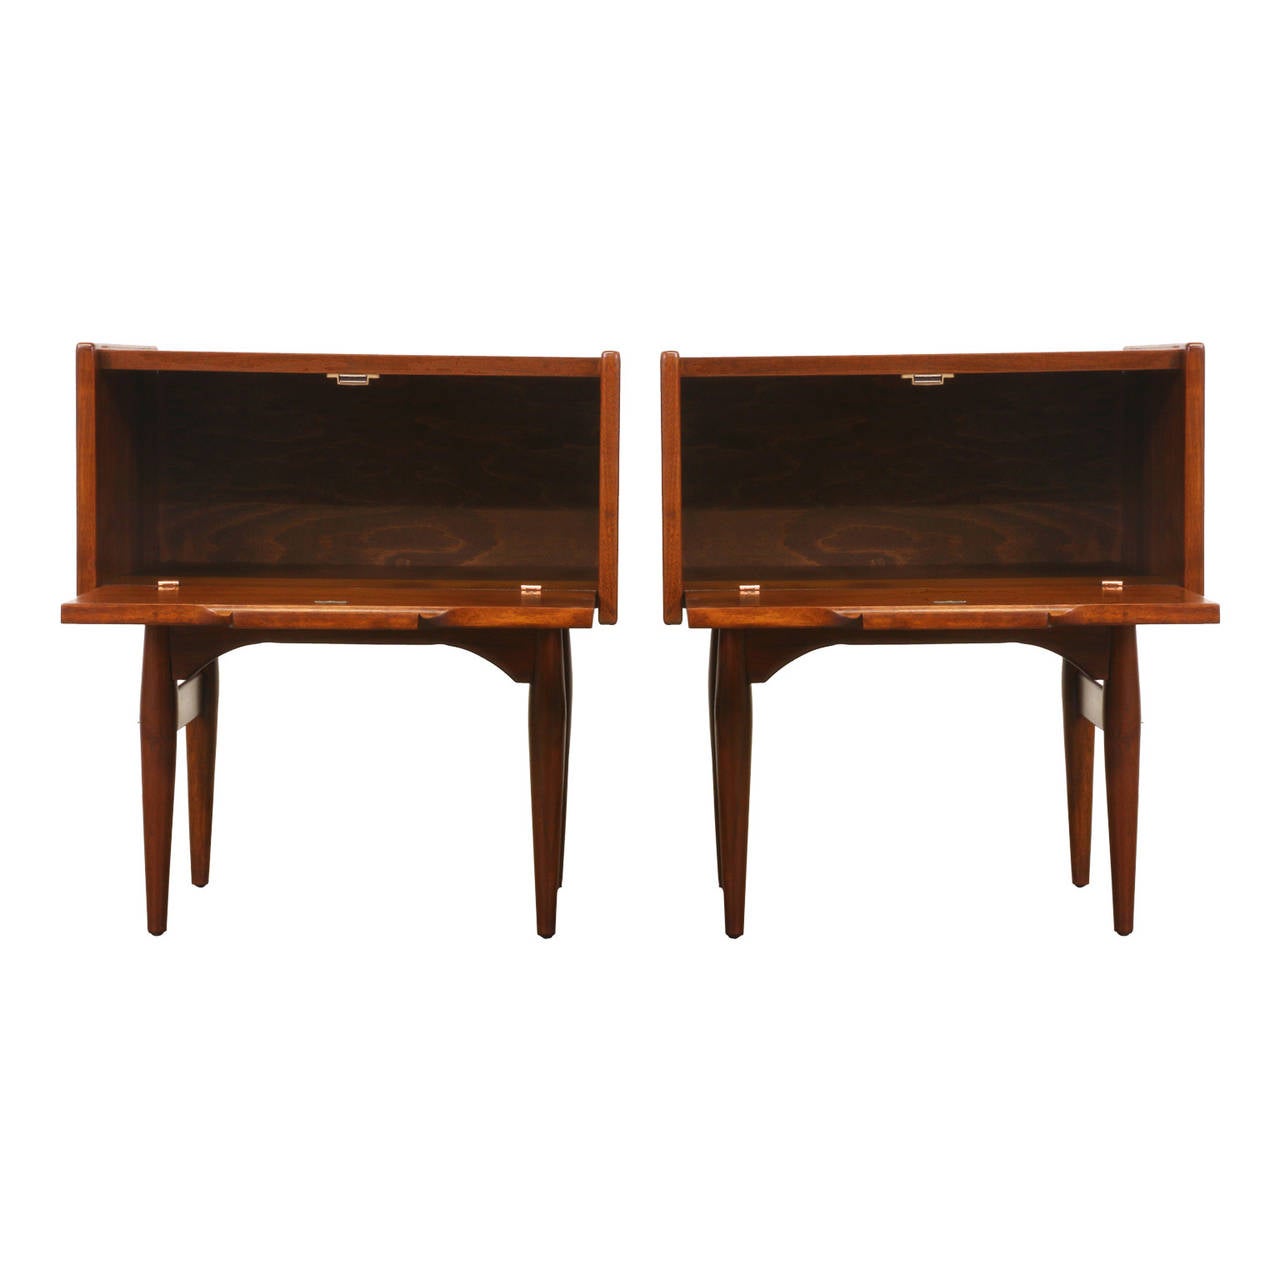 Designer: John Keal
Manufacturer: Brown & Saltman
Period/Style: Mid Century Modern
Country: United States
Date: 1950′s

Dimensions: 22.25″H x 20″W x 15.75“D
Materials: Walnut
Condition: Excellent – Newly Refinished
Number of Items: 2